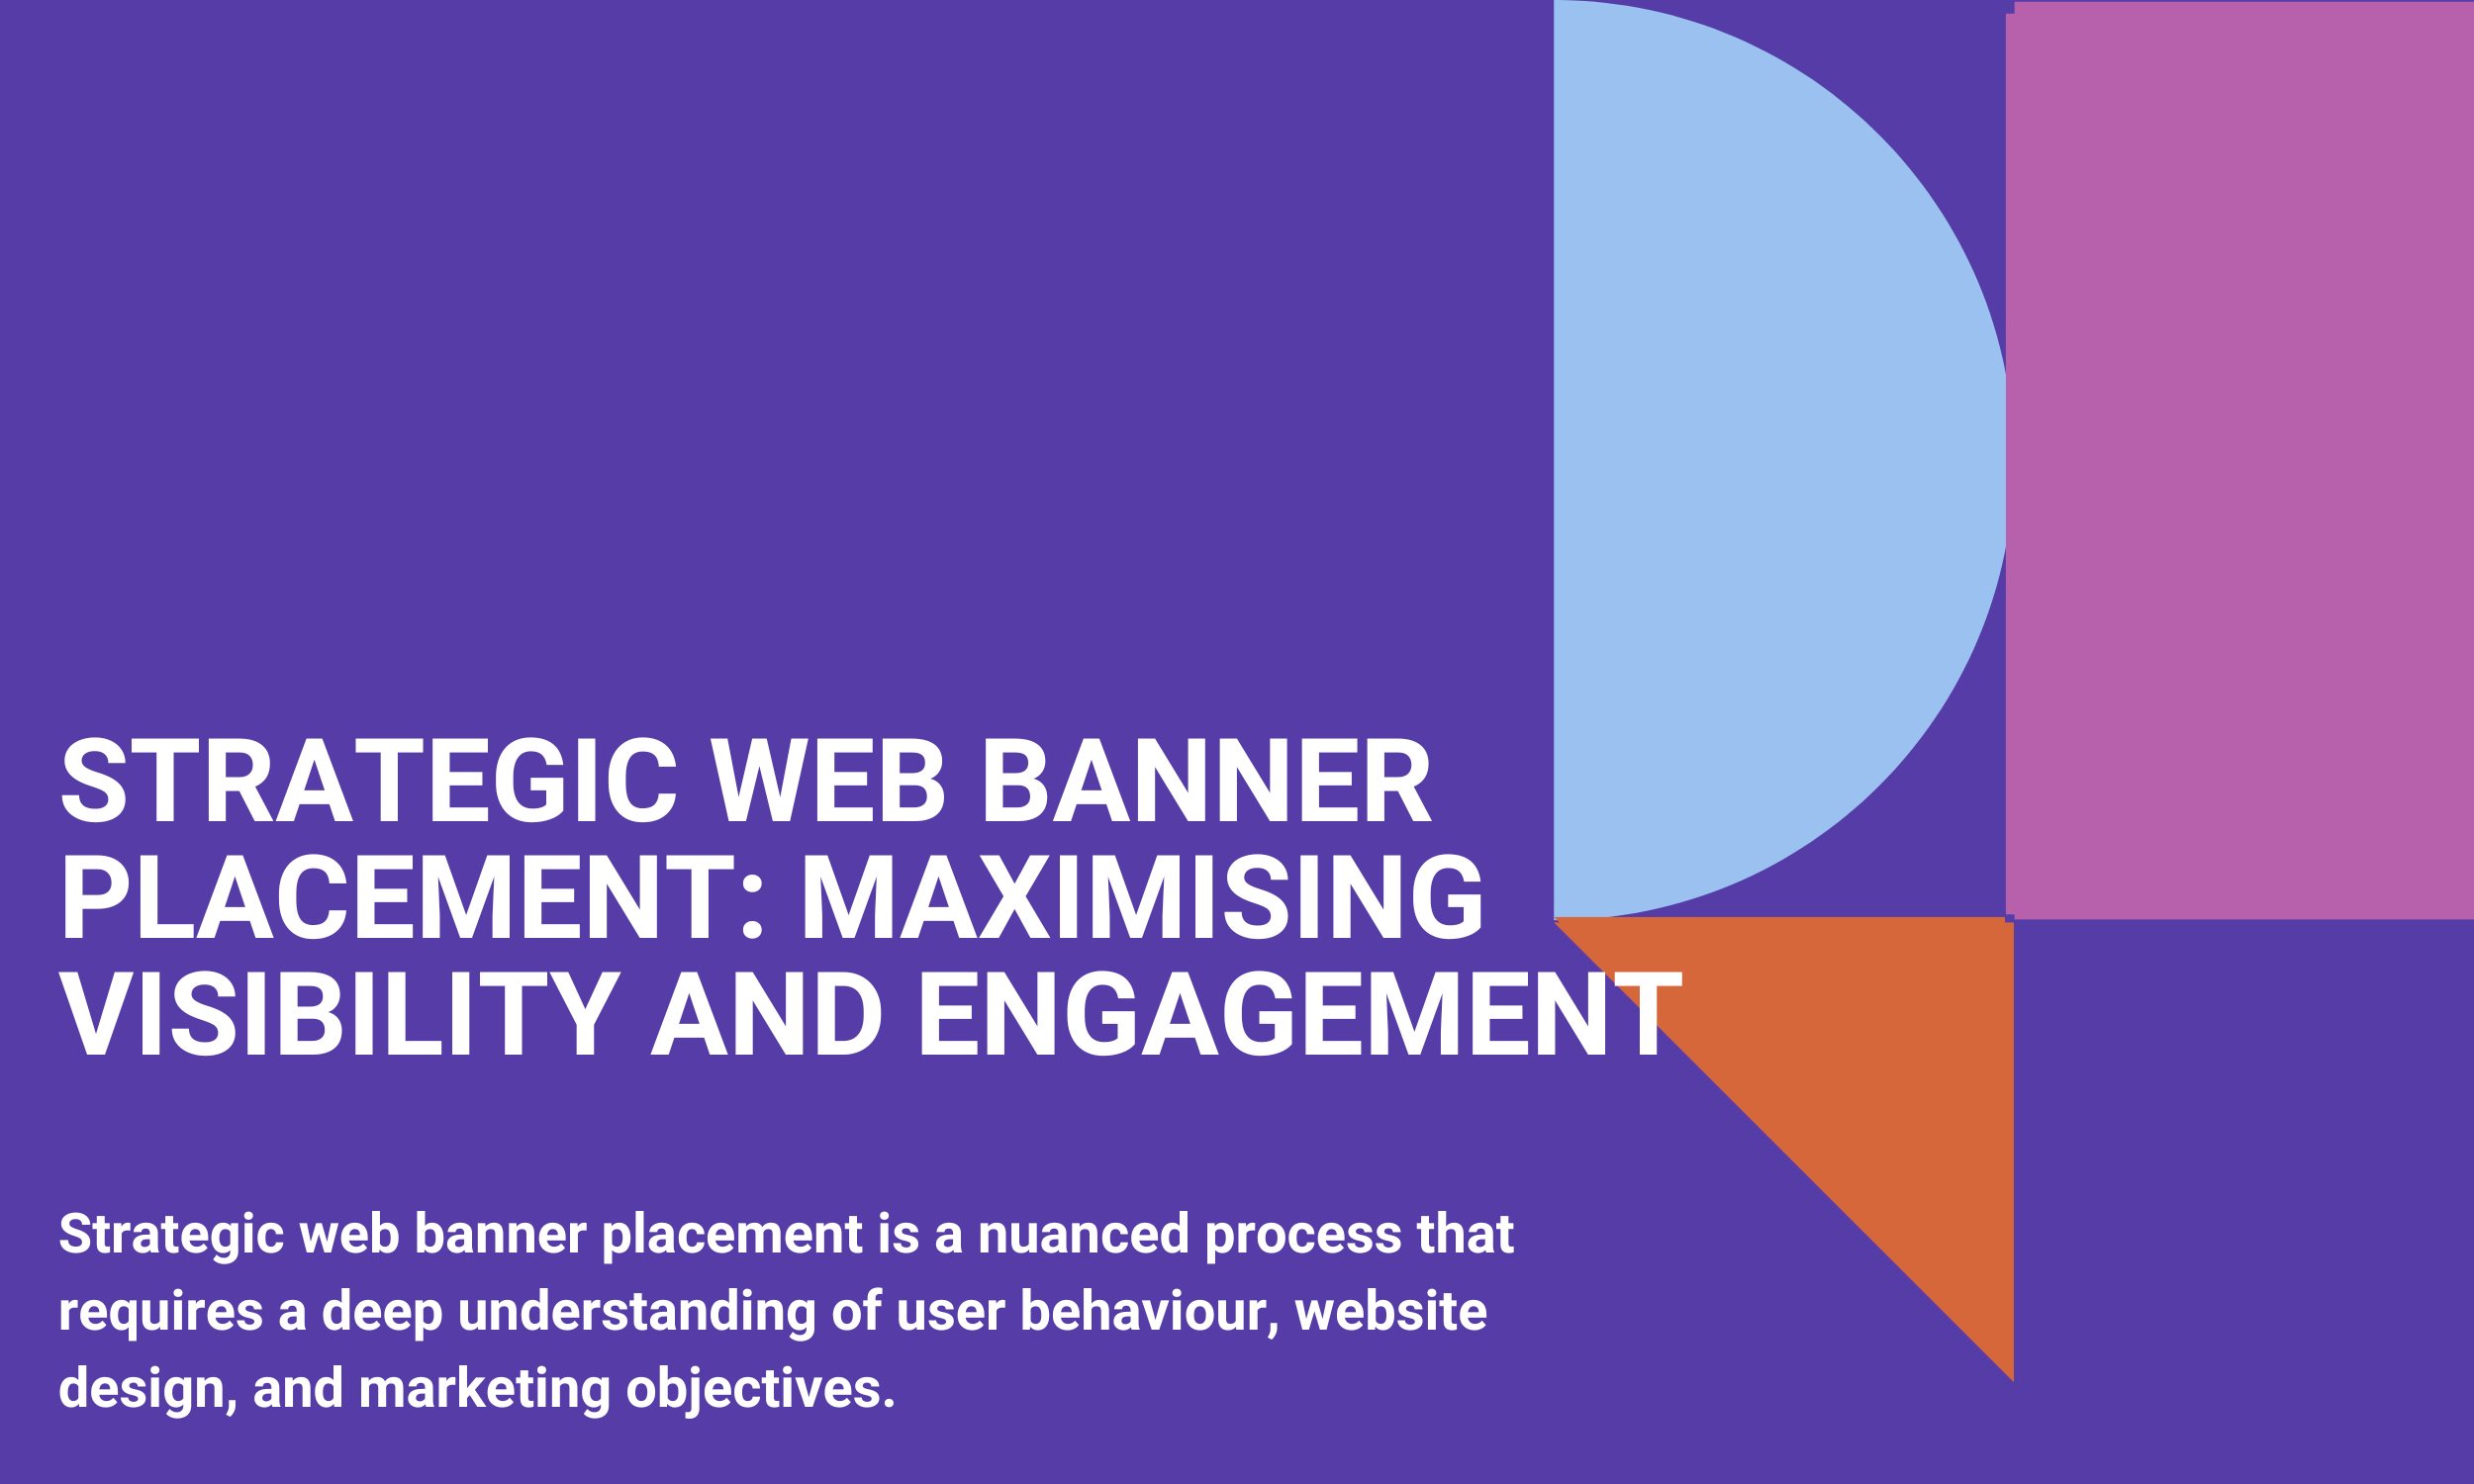 Strategic Web Banner Placement: Maximising Visibility and Engagement